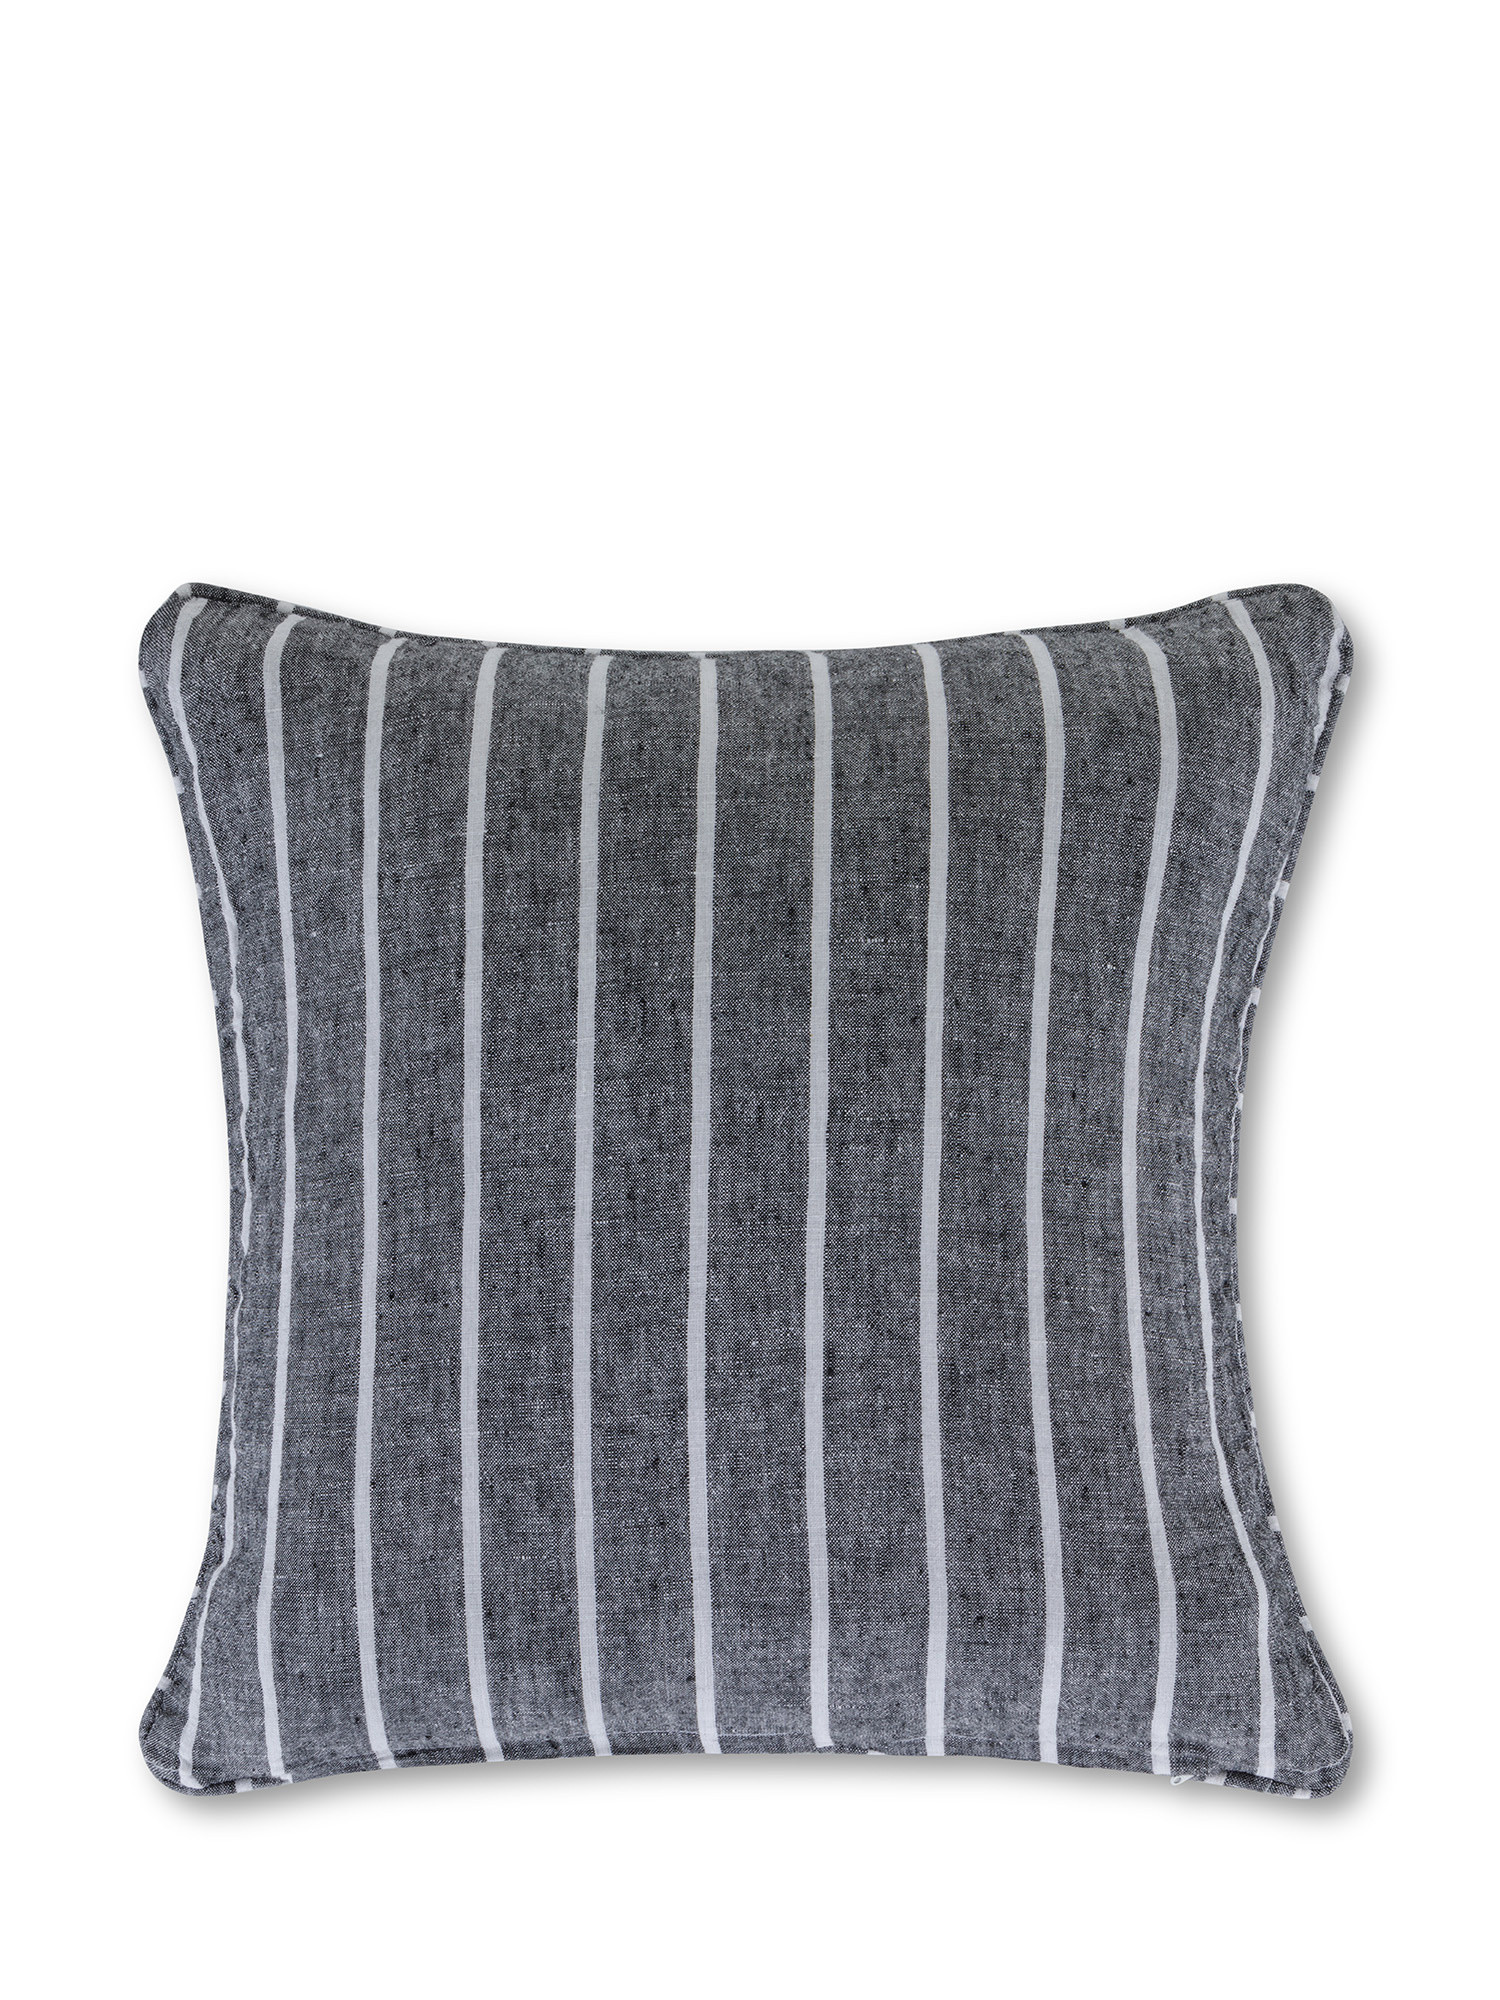 Striped cushion in pure linen 40x40 cm, White, large image number 1